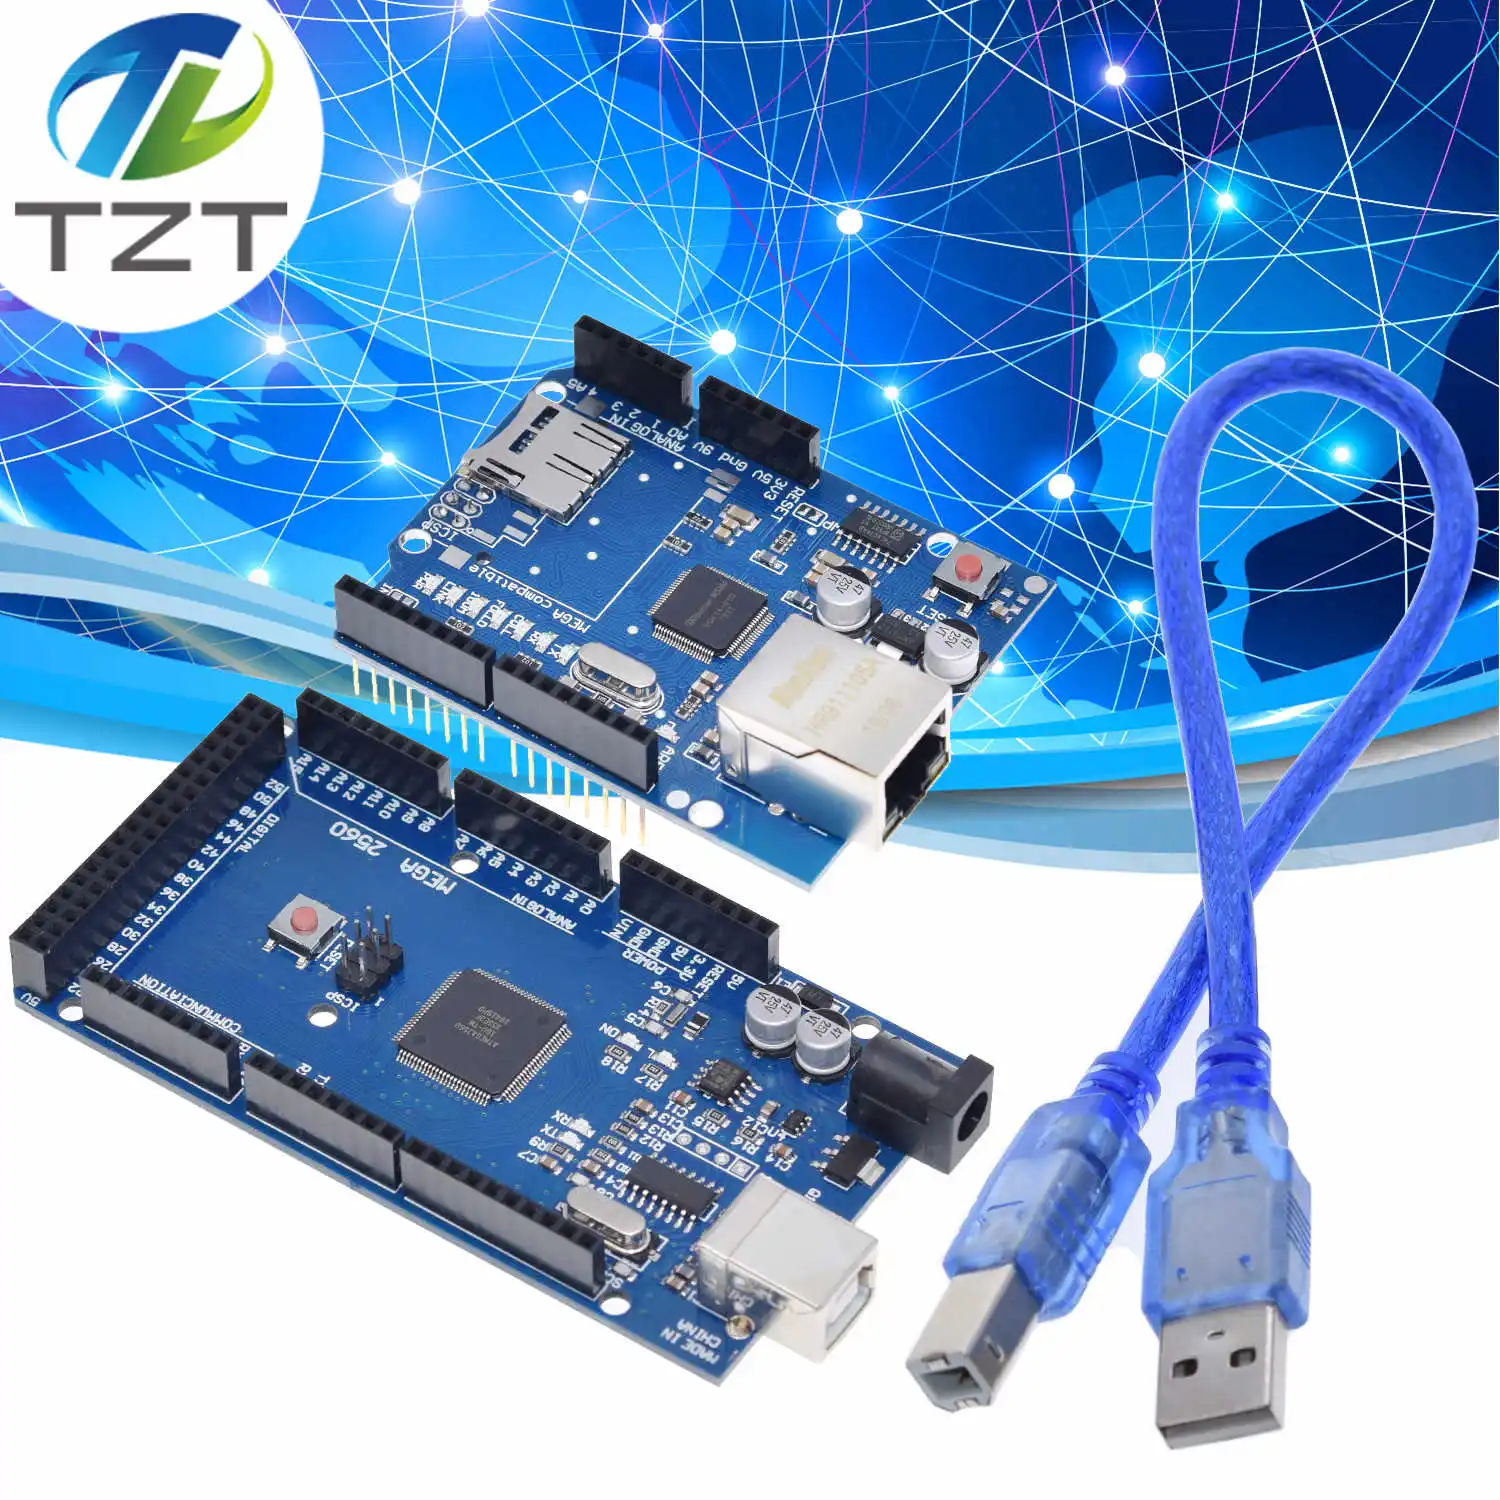 

TZT UNO Ethernet W5100 network expansion board SD card Shield for arduino with Mega 2560 R3 Mega2560 REV3